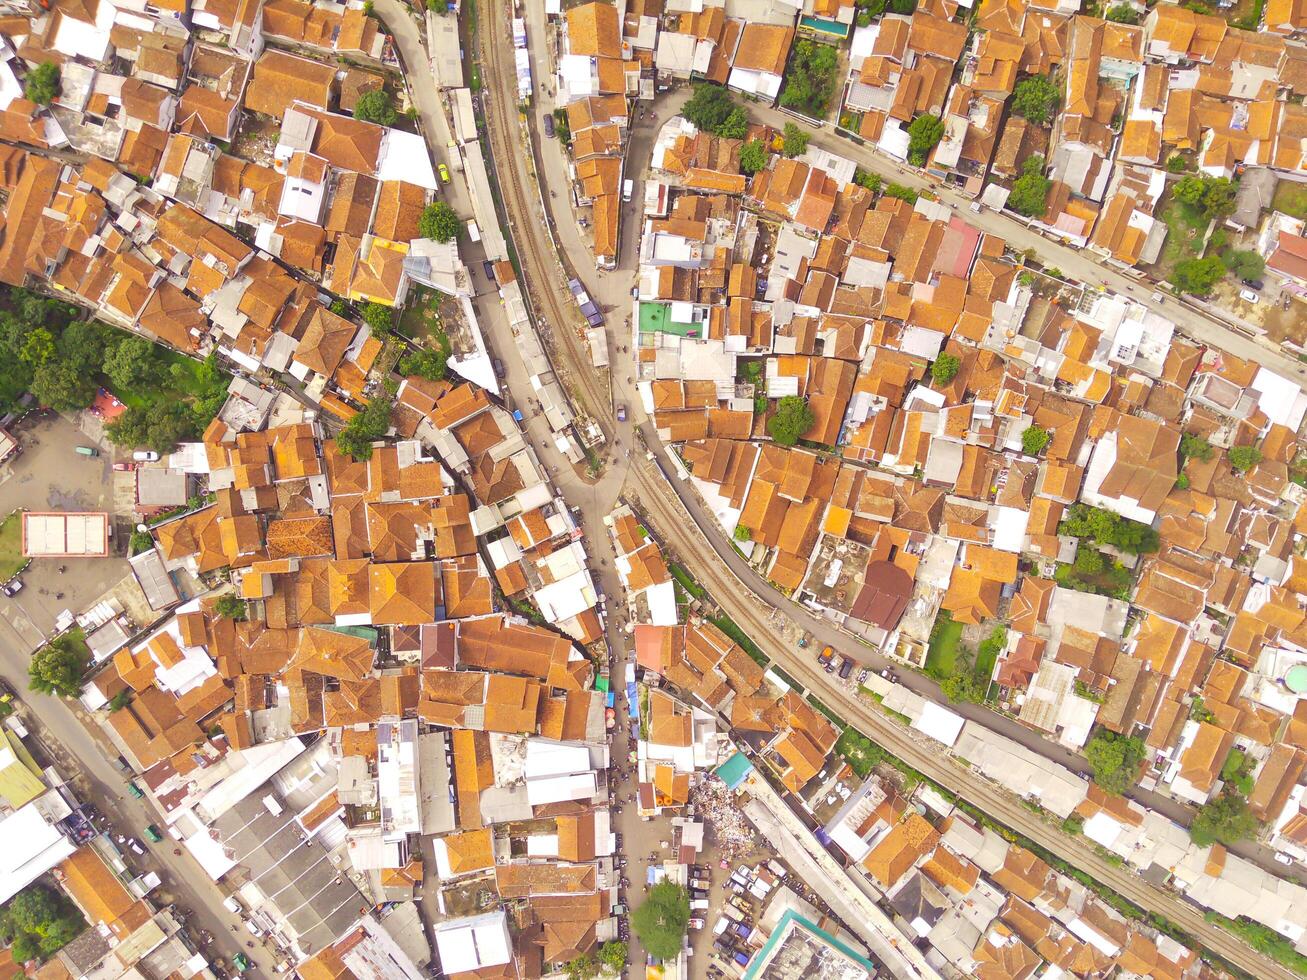 Amazing landscape of Train Tracks. Bird's eye view from drone of a railway line in the middle of densely populated houses in Cicalengka, Indonesia. Shot from a drone flying 200 meters high. photo